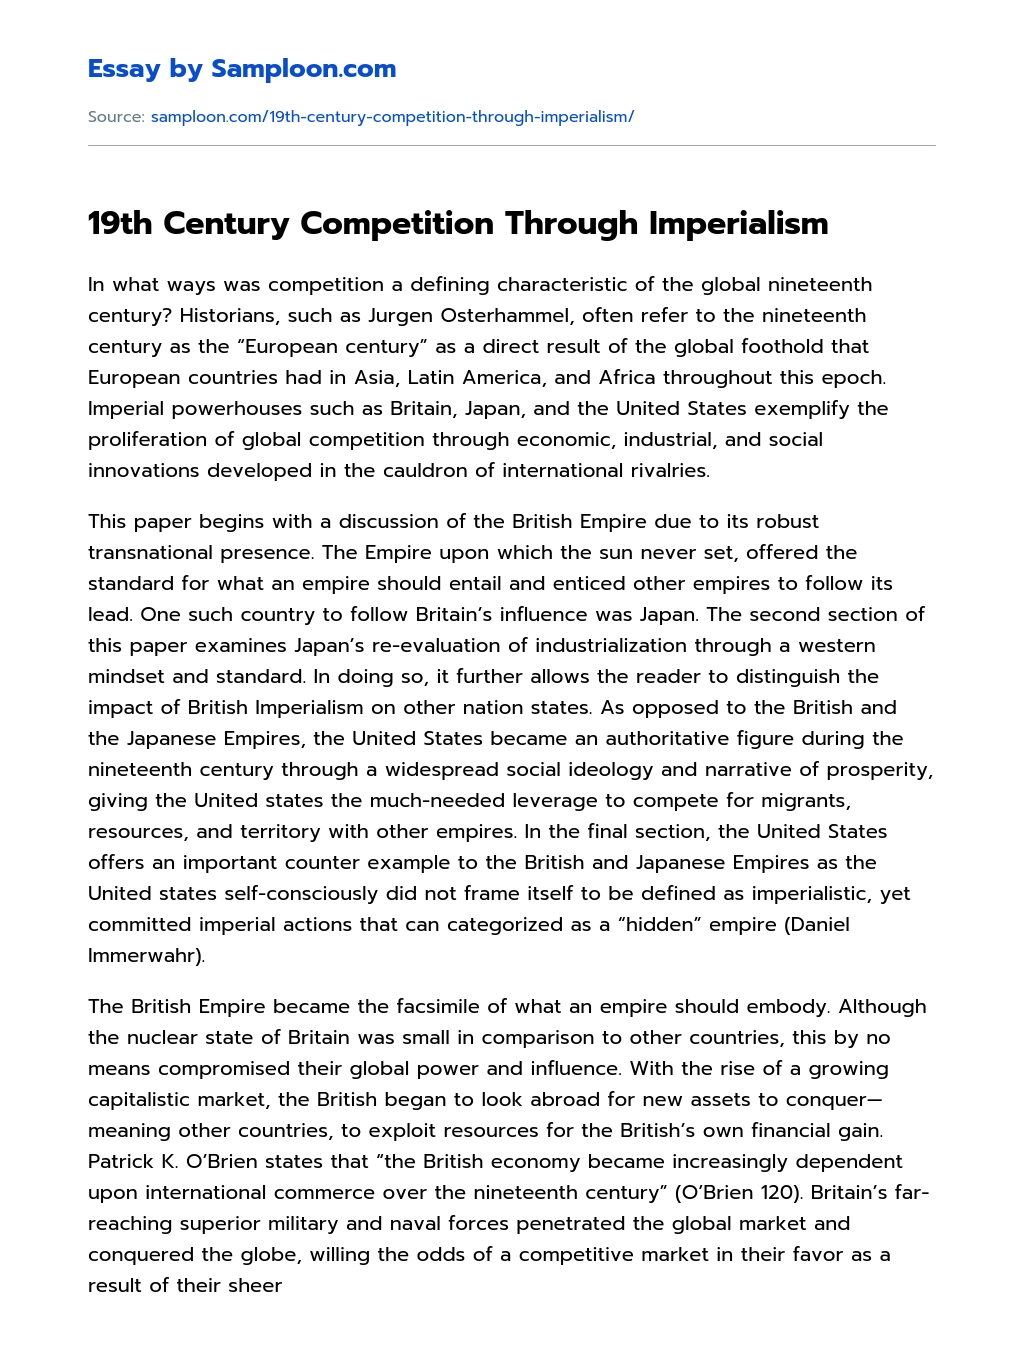 19th Century Competition Through Imperialism essay